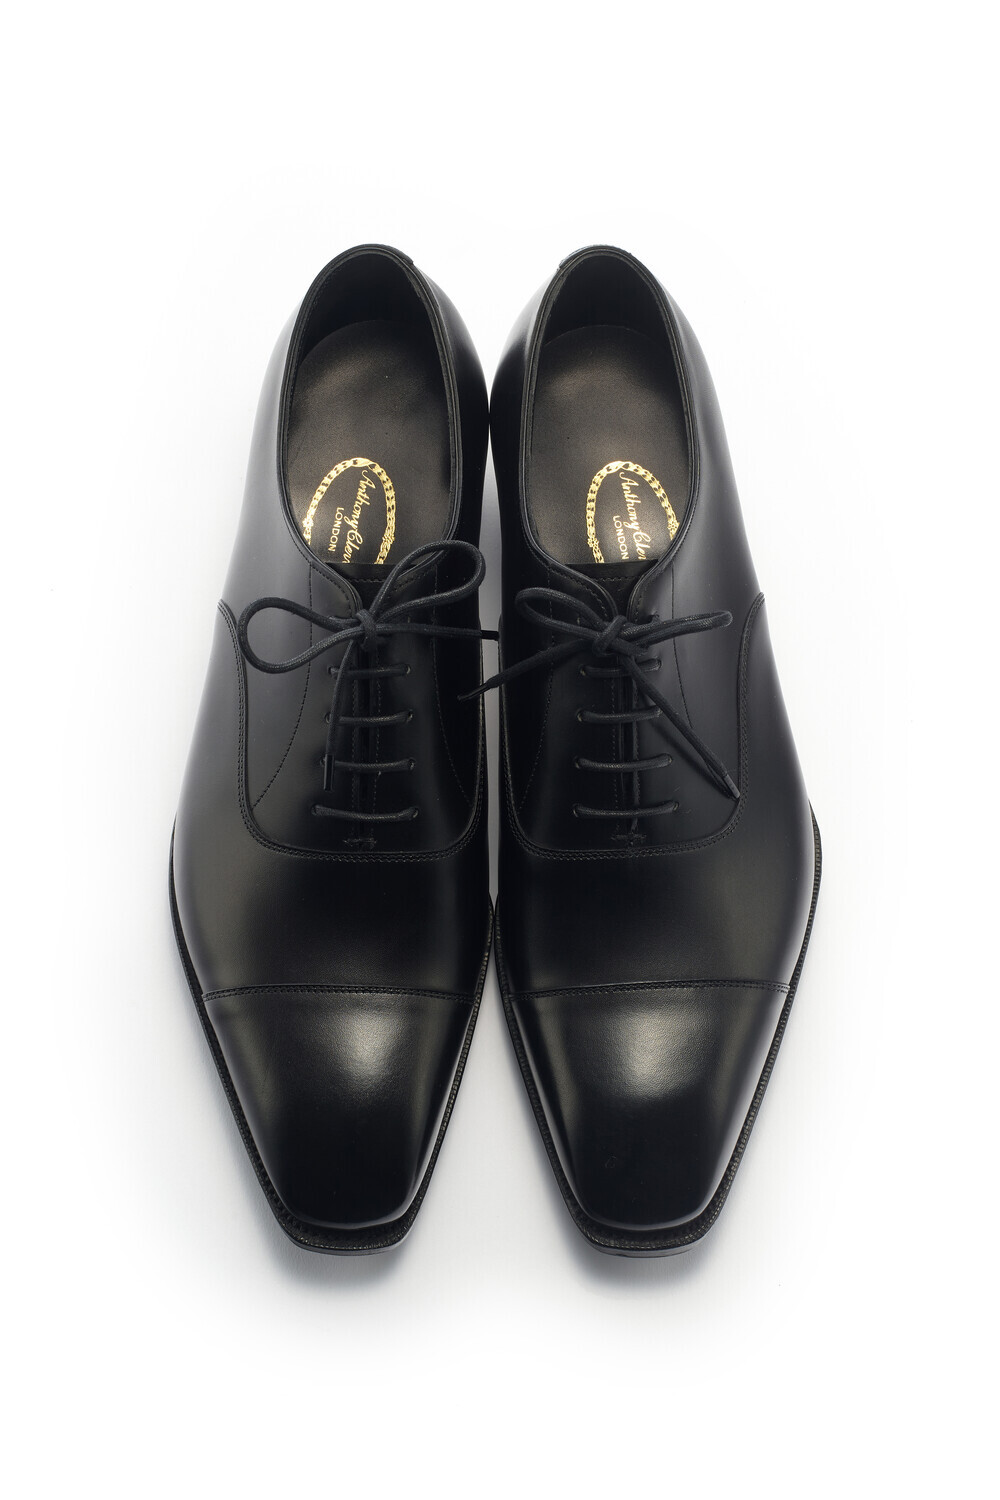 Anthony Cleverley Bodie Cap-Toe Leather Oxford Shoes